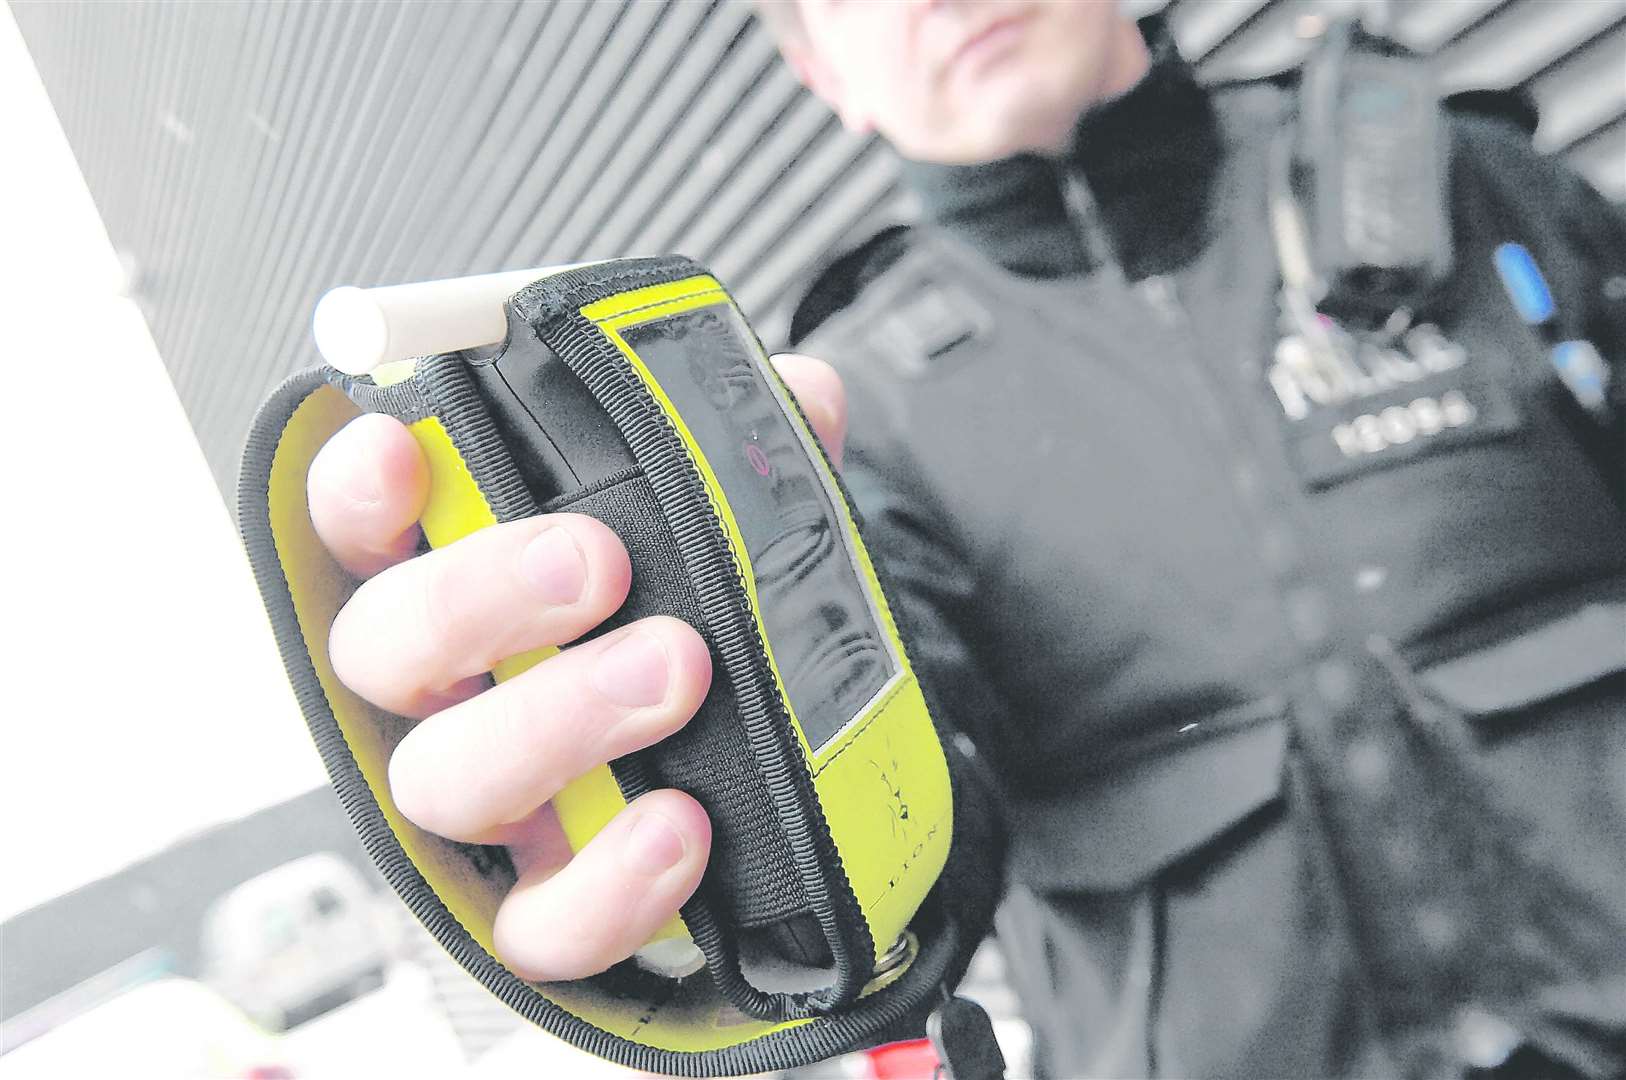 Police will carry out breathalyser tests day and night in high risks areas across the county.